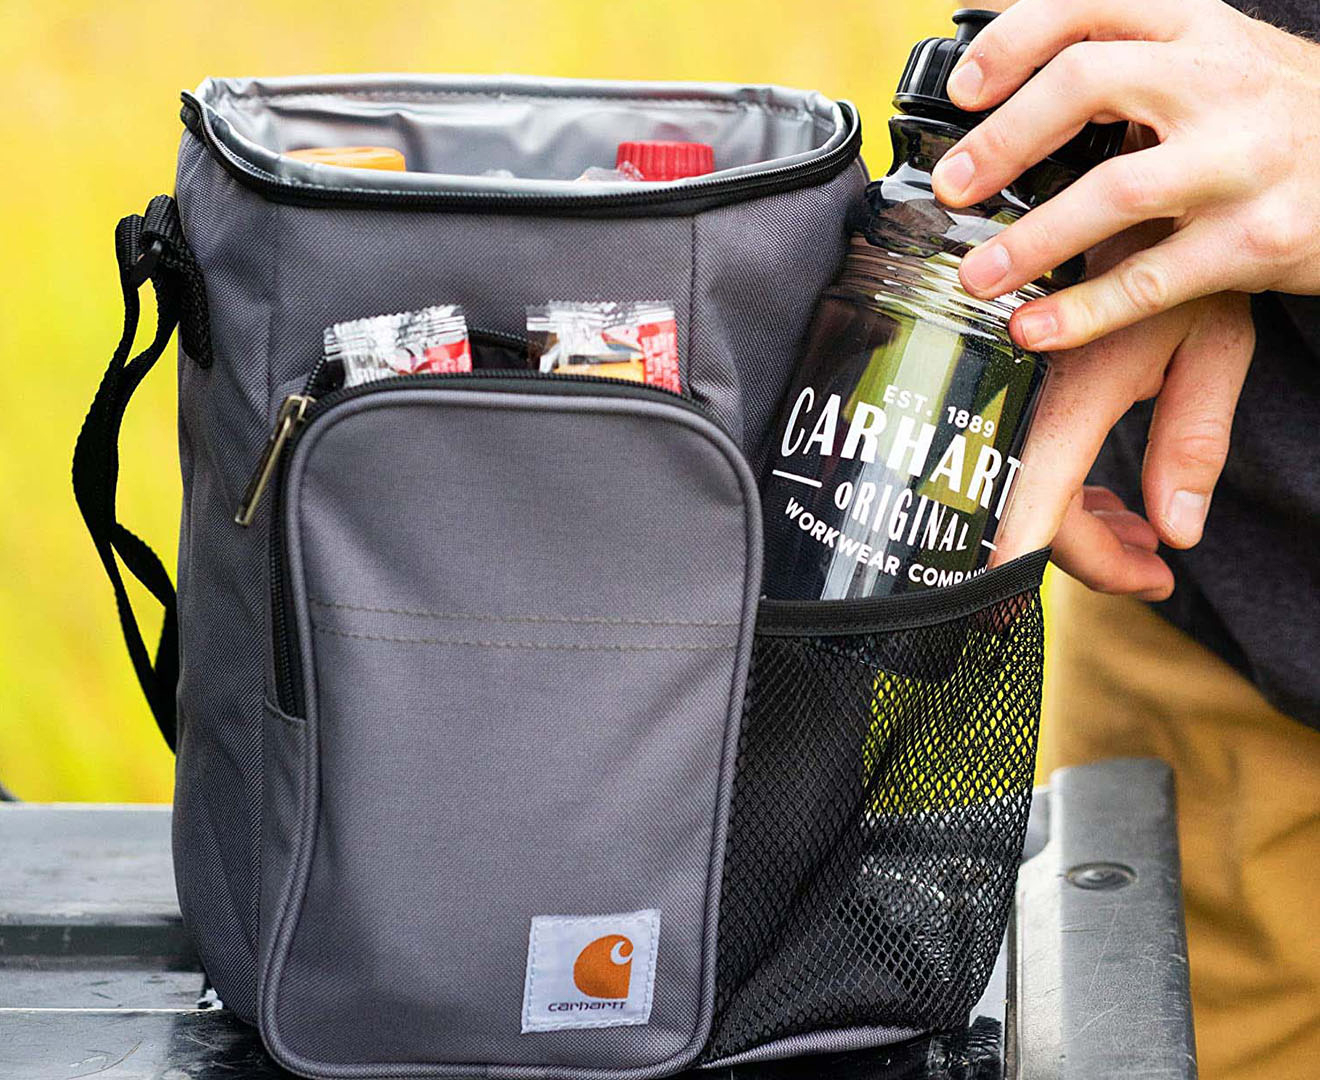 Carhartt Vertical Lunch Cooler Bag With Water Bottle - Grey | Catch.com.au